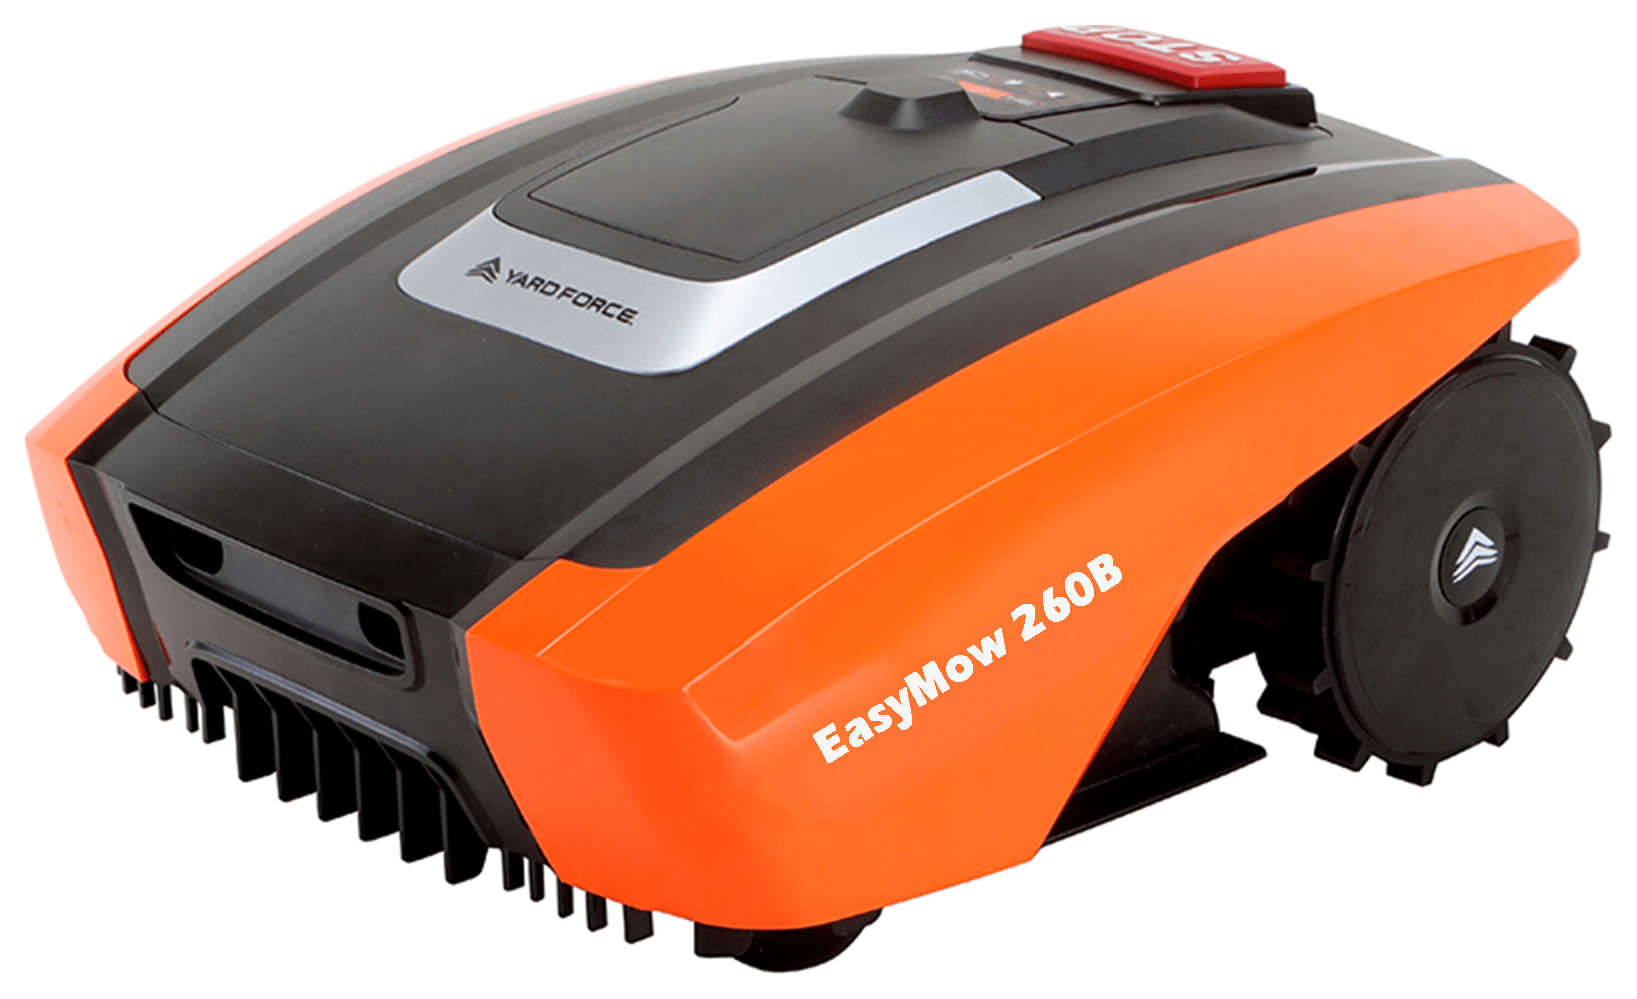 Yard Force EasyMow 260B Robotic Lawnmower with Additional